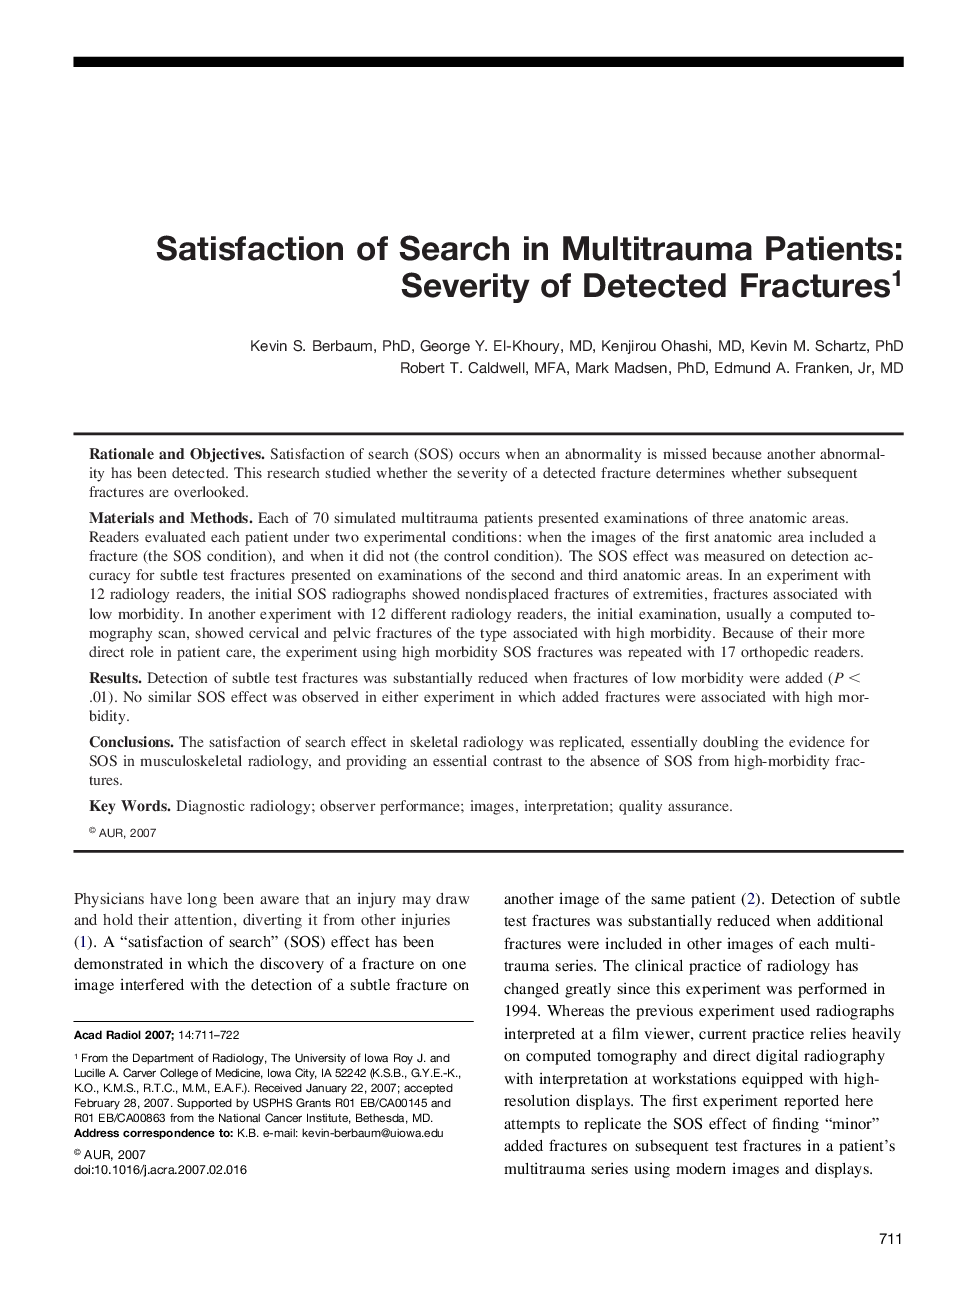 Satisfaction of Search in Multitrauma Patients: Severity of Detected Fractures